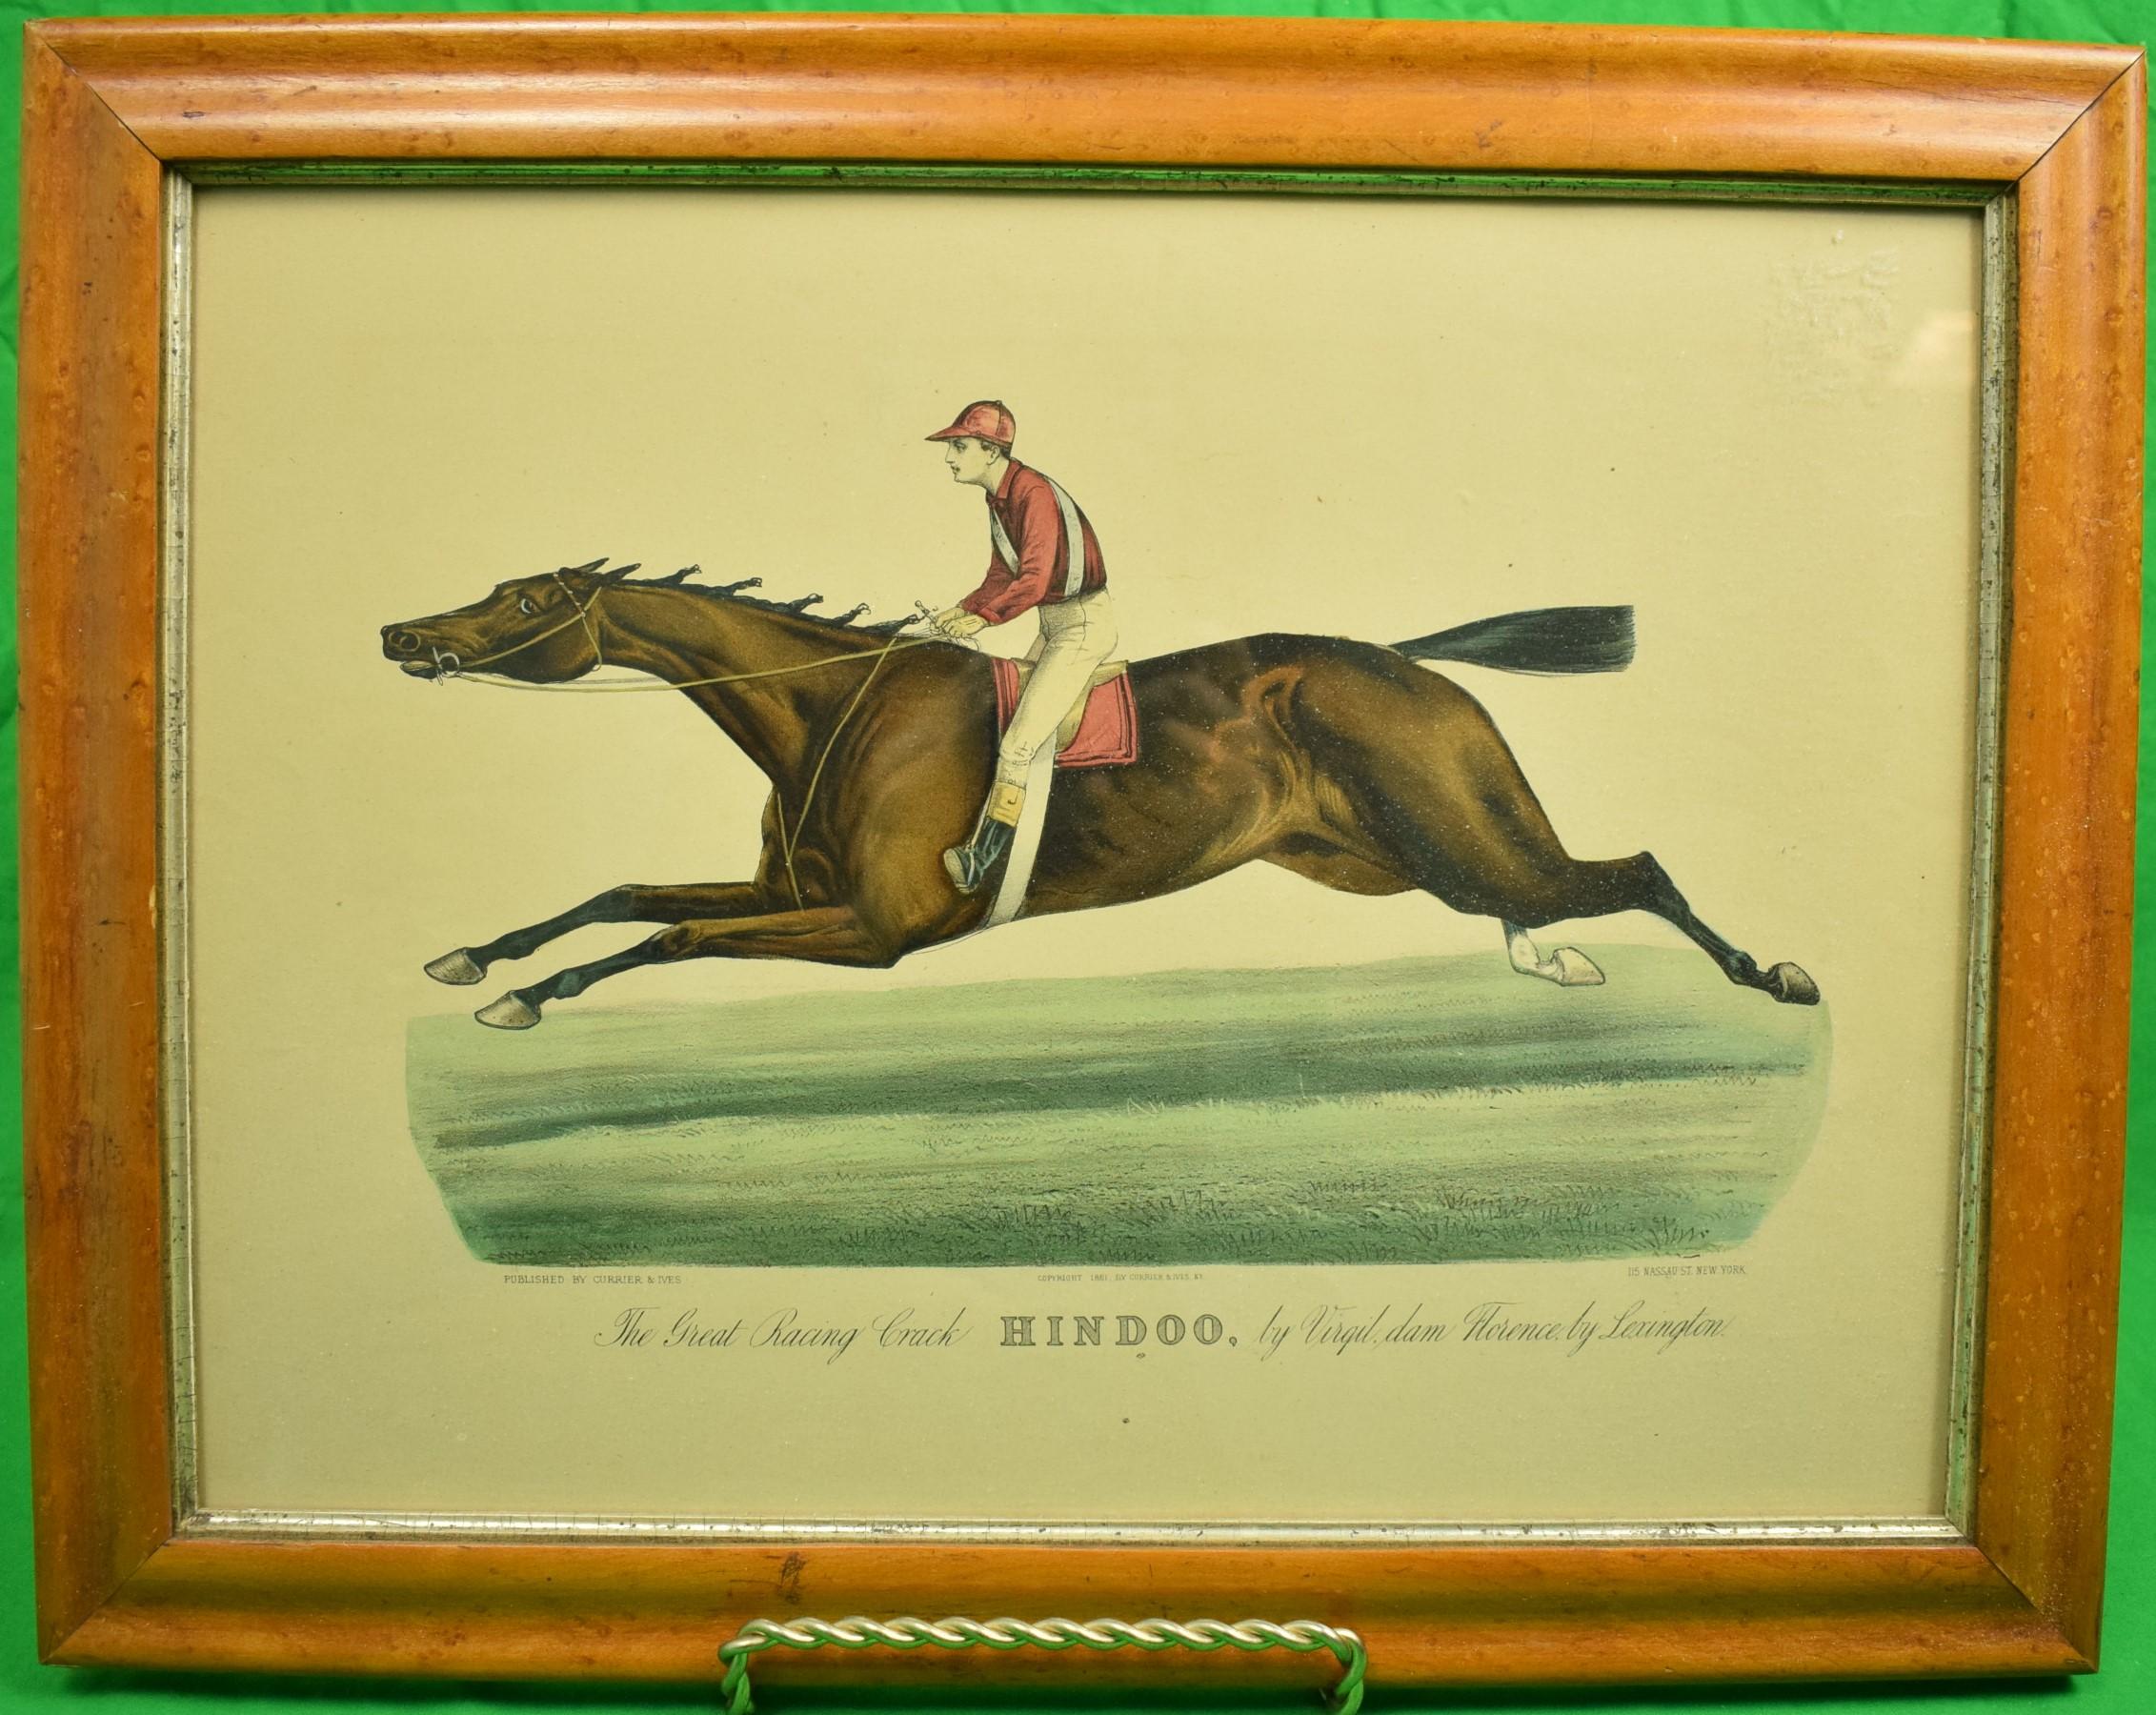 "The Great Racing Crack HINDOO, by Virgil, dam Florence, by Lexington", hand colored lithograph, copyright 1861

Published by Currier & Ives

Print Sz: 12 1/4"H x 16 3/4"W

Frame Sz: 15 1/2"H x 20"W

w/ bird's-eye molded frame w/ gilt liner, glazed